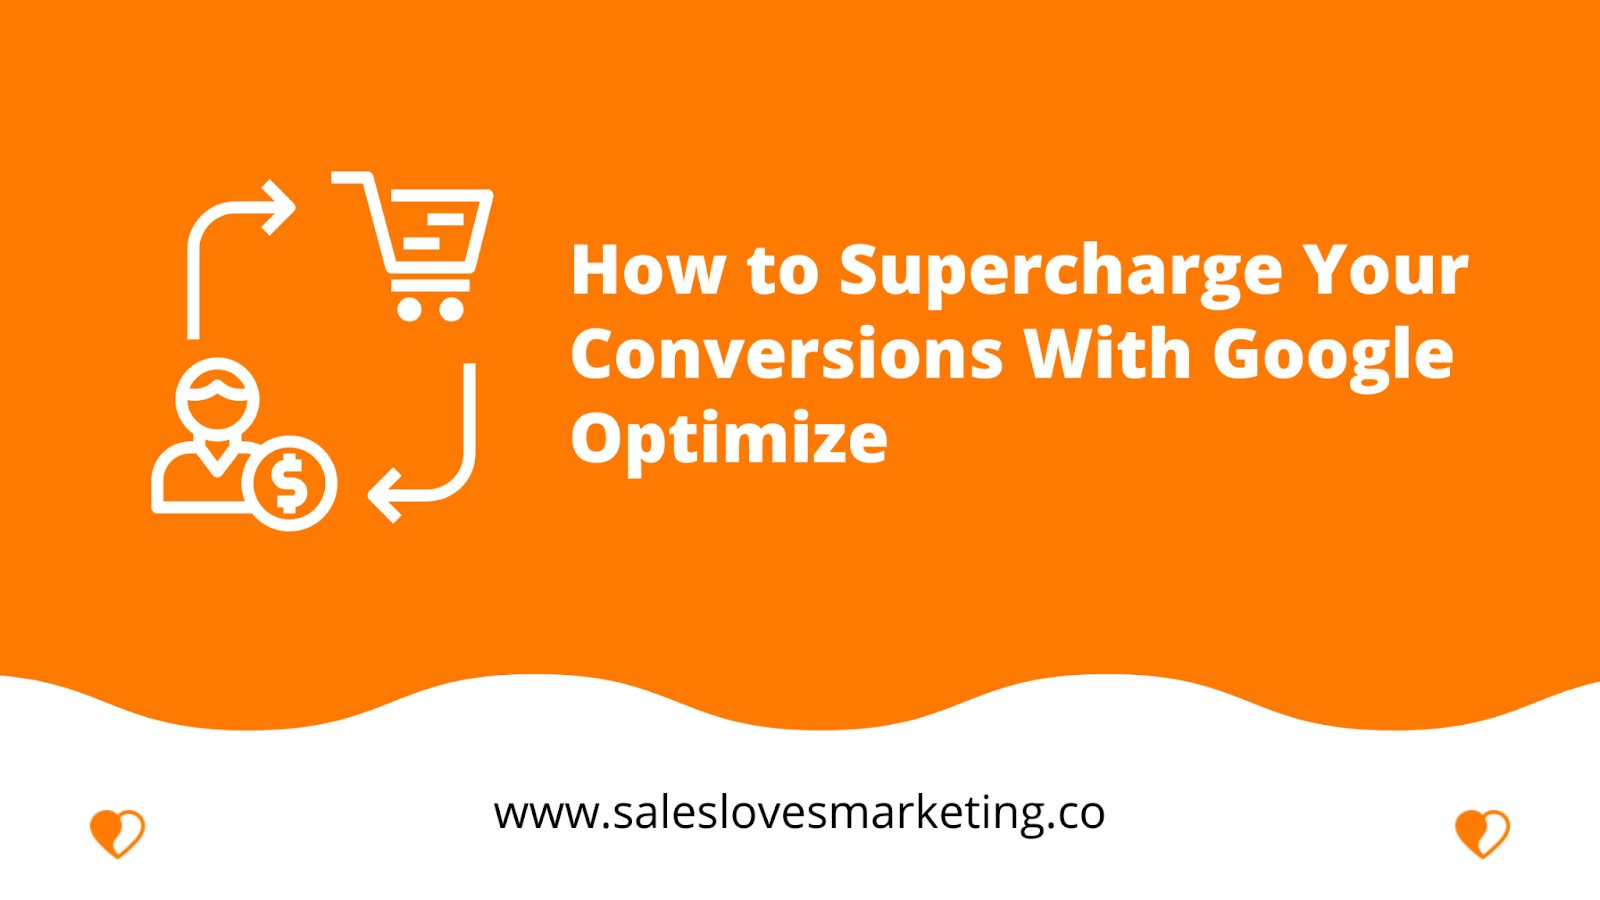 How to Supercharge Your Conversions With Google Optimize